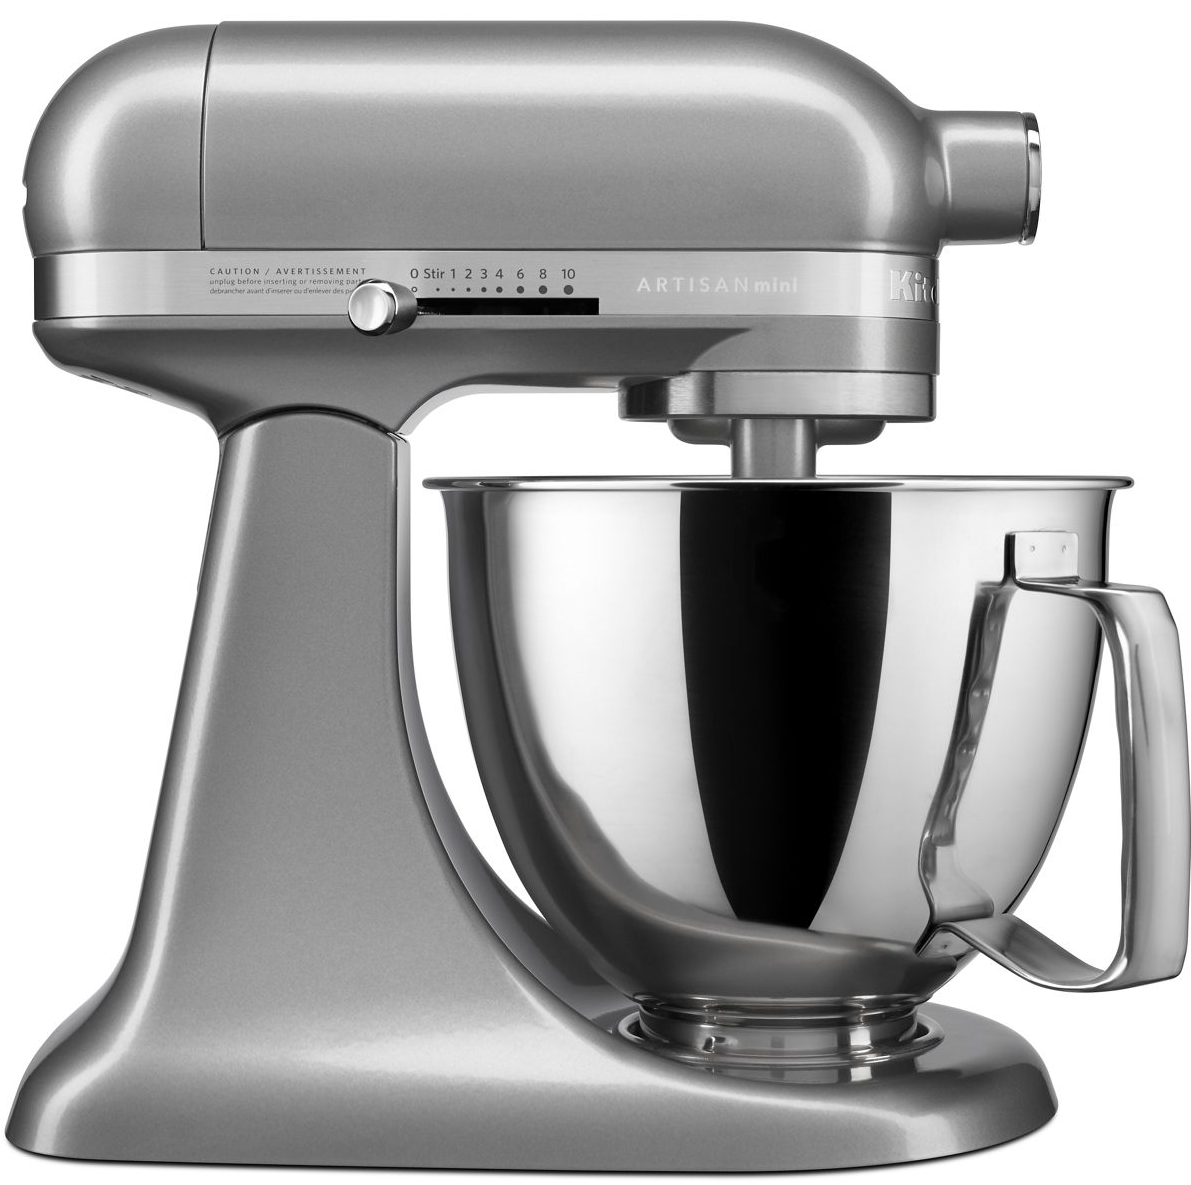 Is Walmart Giving Away KitchenAid Mixers for $2 on Facebook